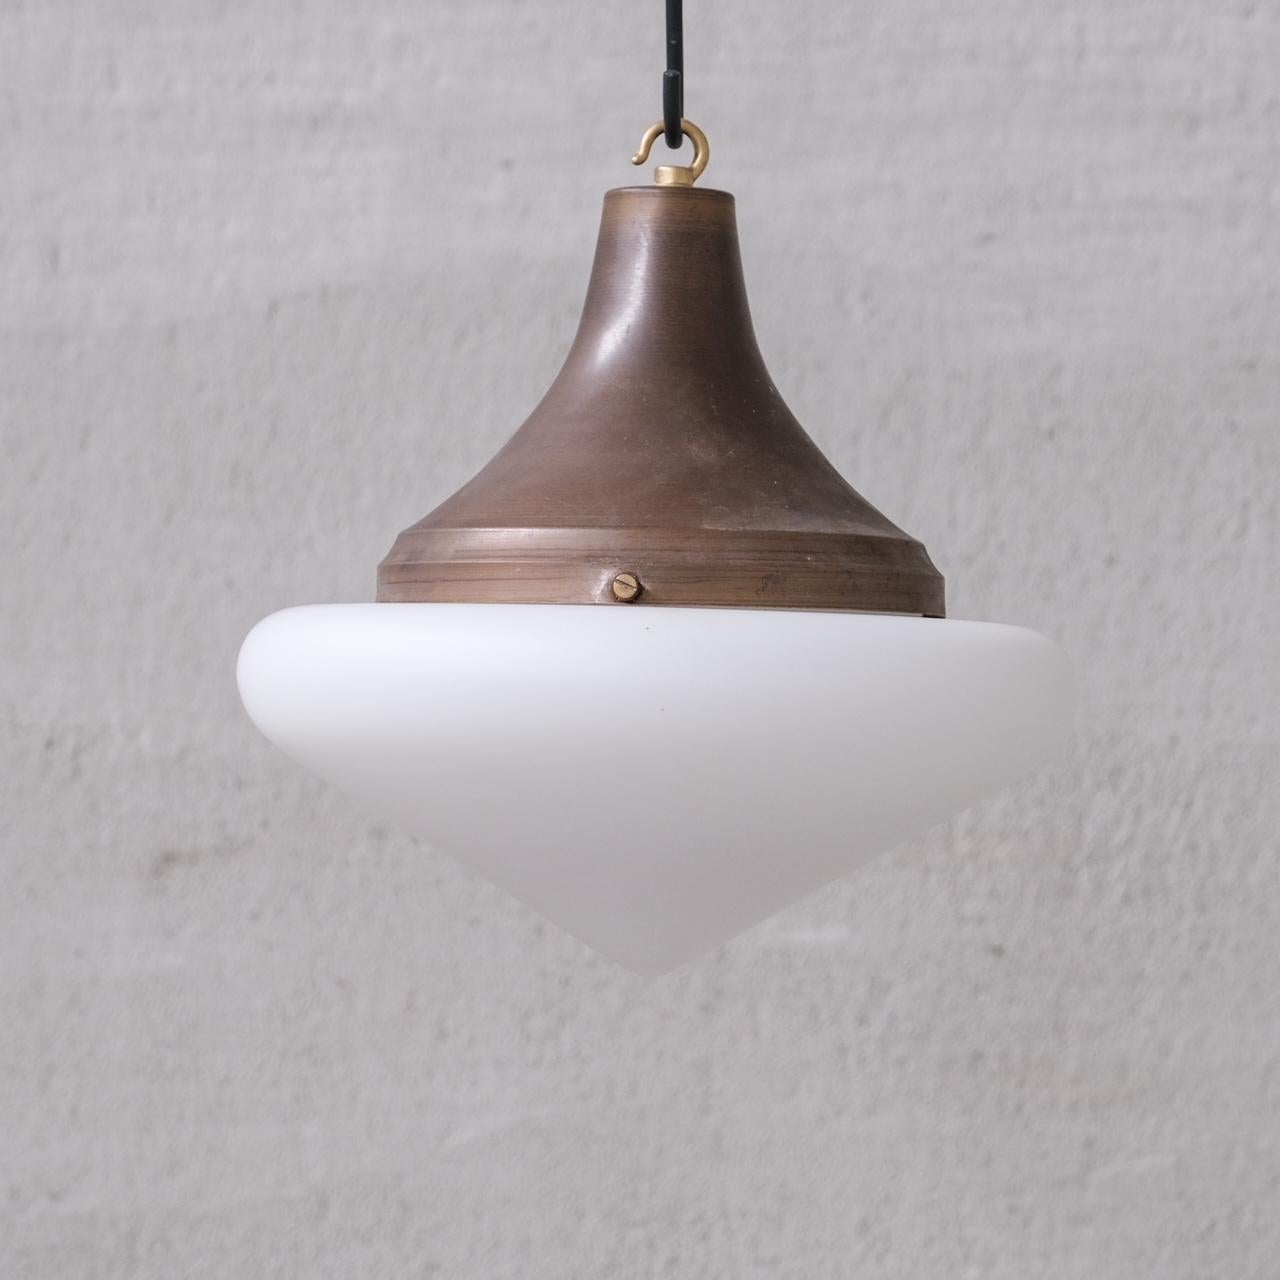 A single elegant opaline pendant, in matt glass finish.

France, c1950s.

Paired with a metal gallery that looks to be naturally patinated brass or similar.

No chain or rose was retained, however they are easy to source online.

Good vintage